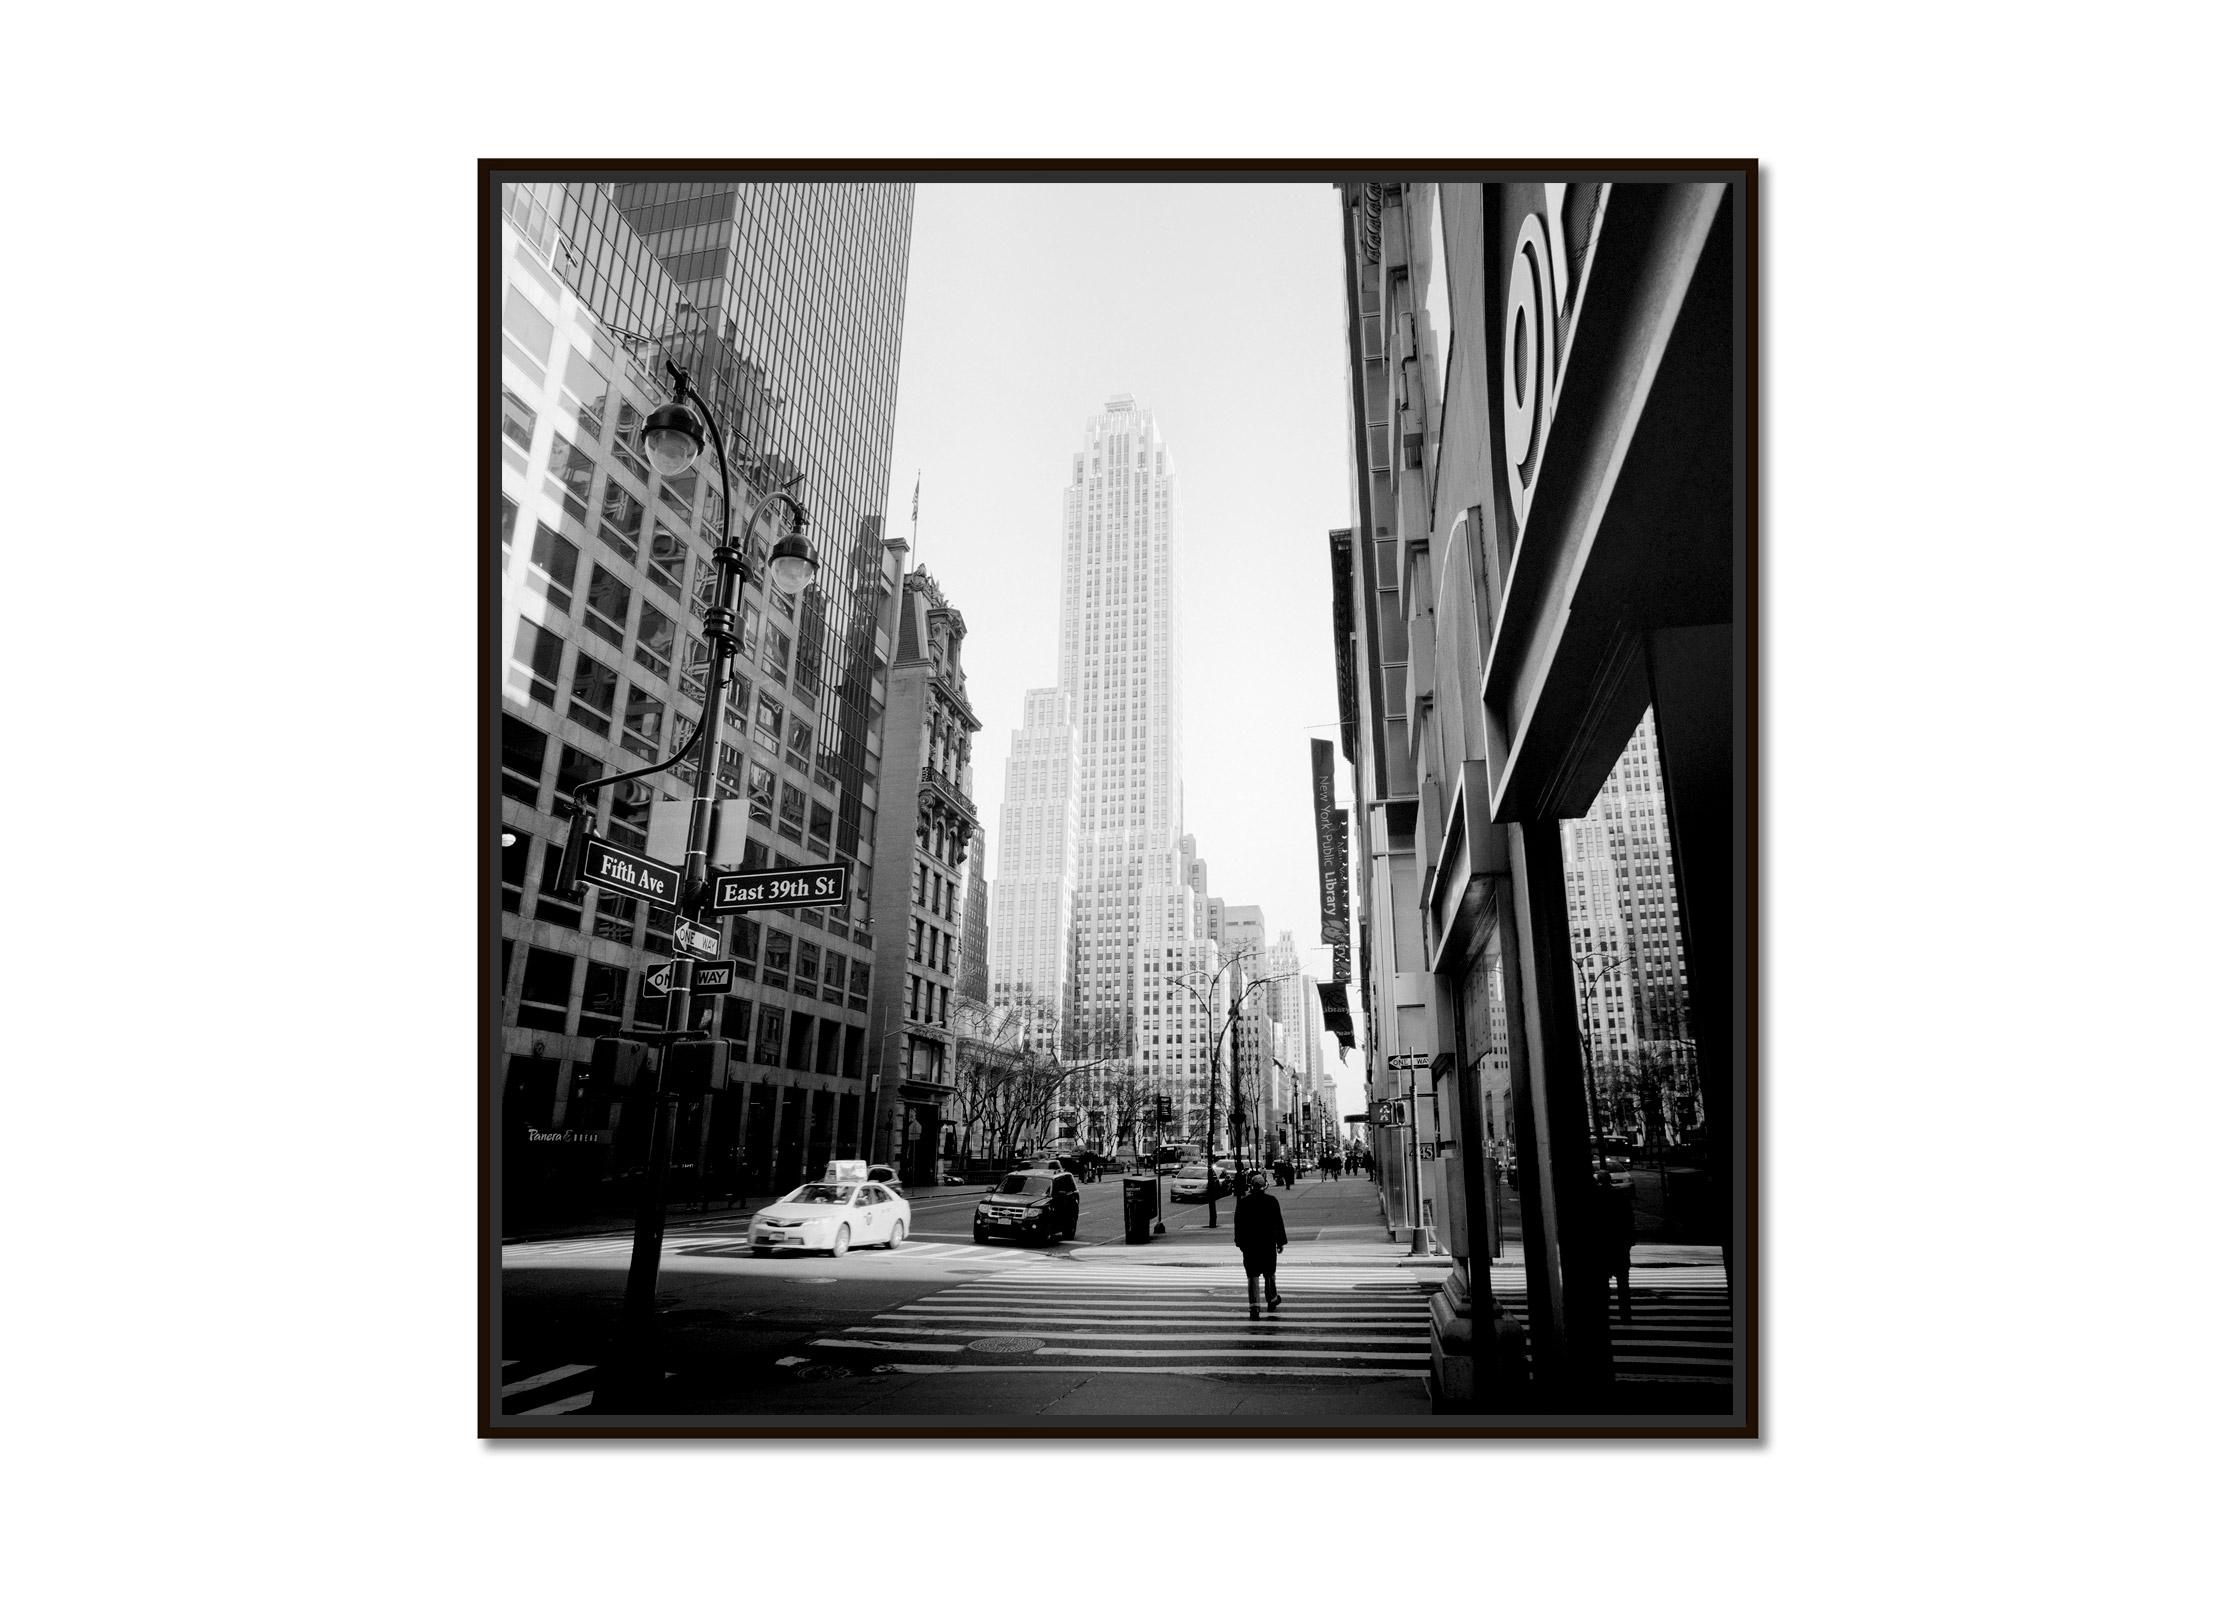 Fifth Ave East 39th St New York City USA black white art cityscape photography - Photograph by Gerald Berghammer